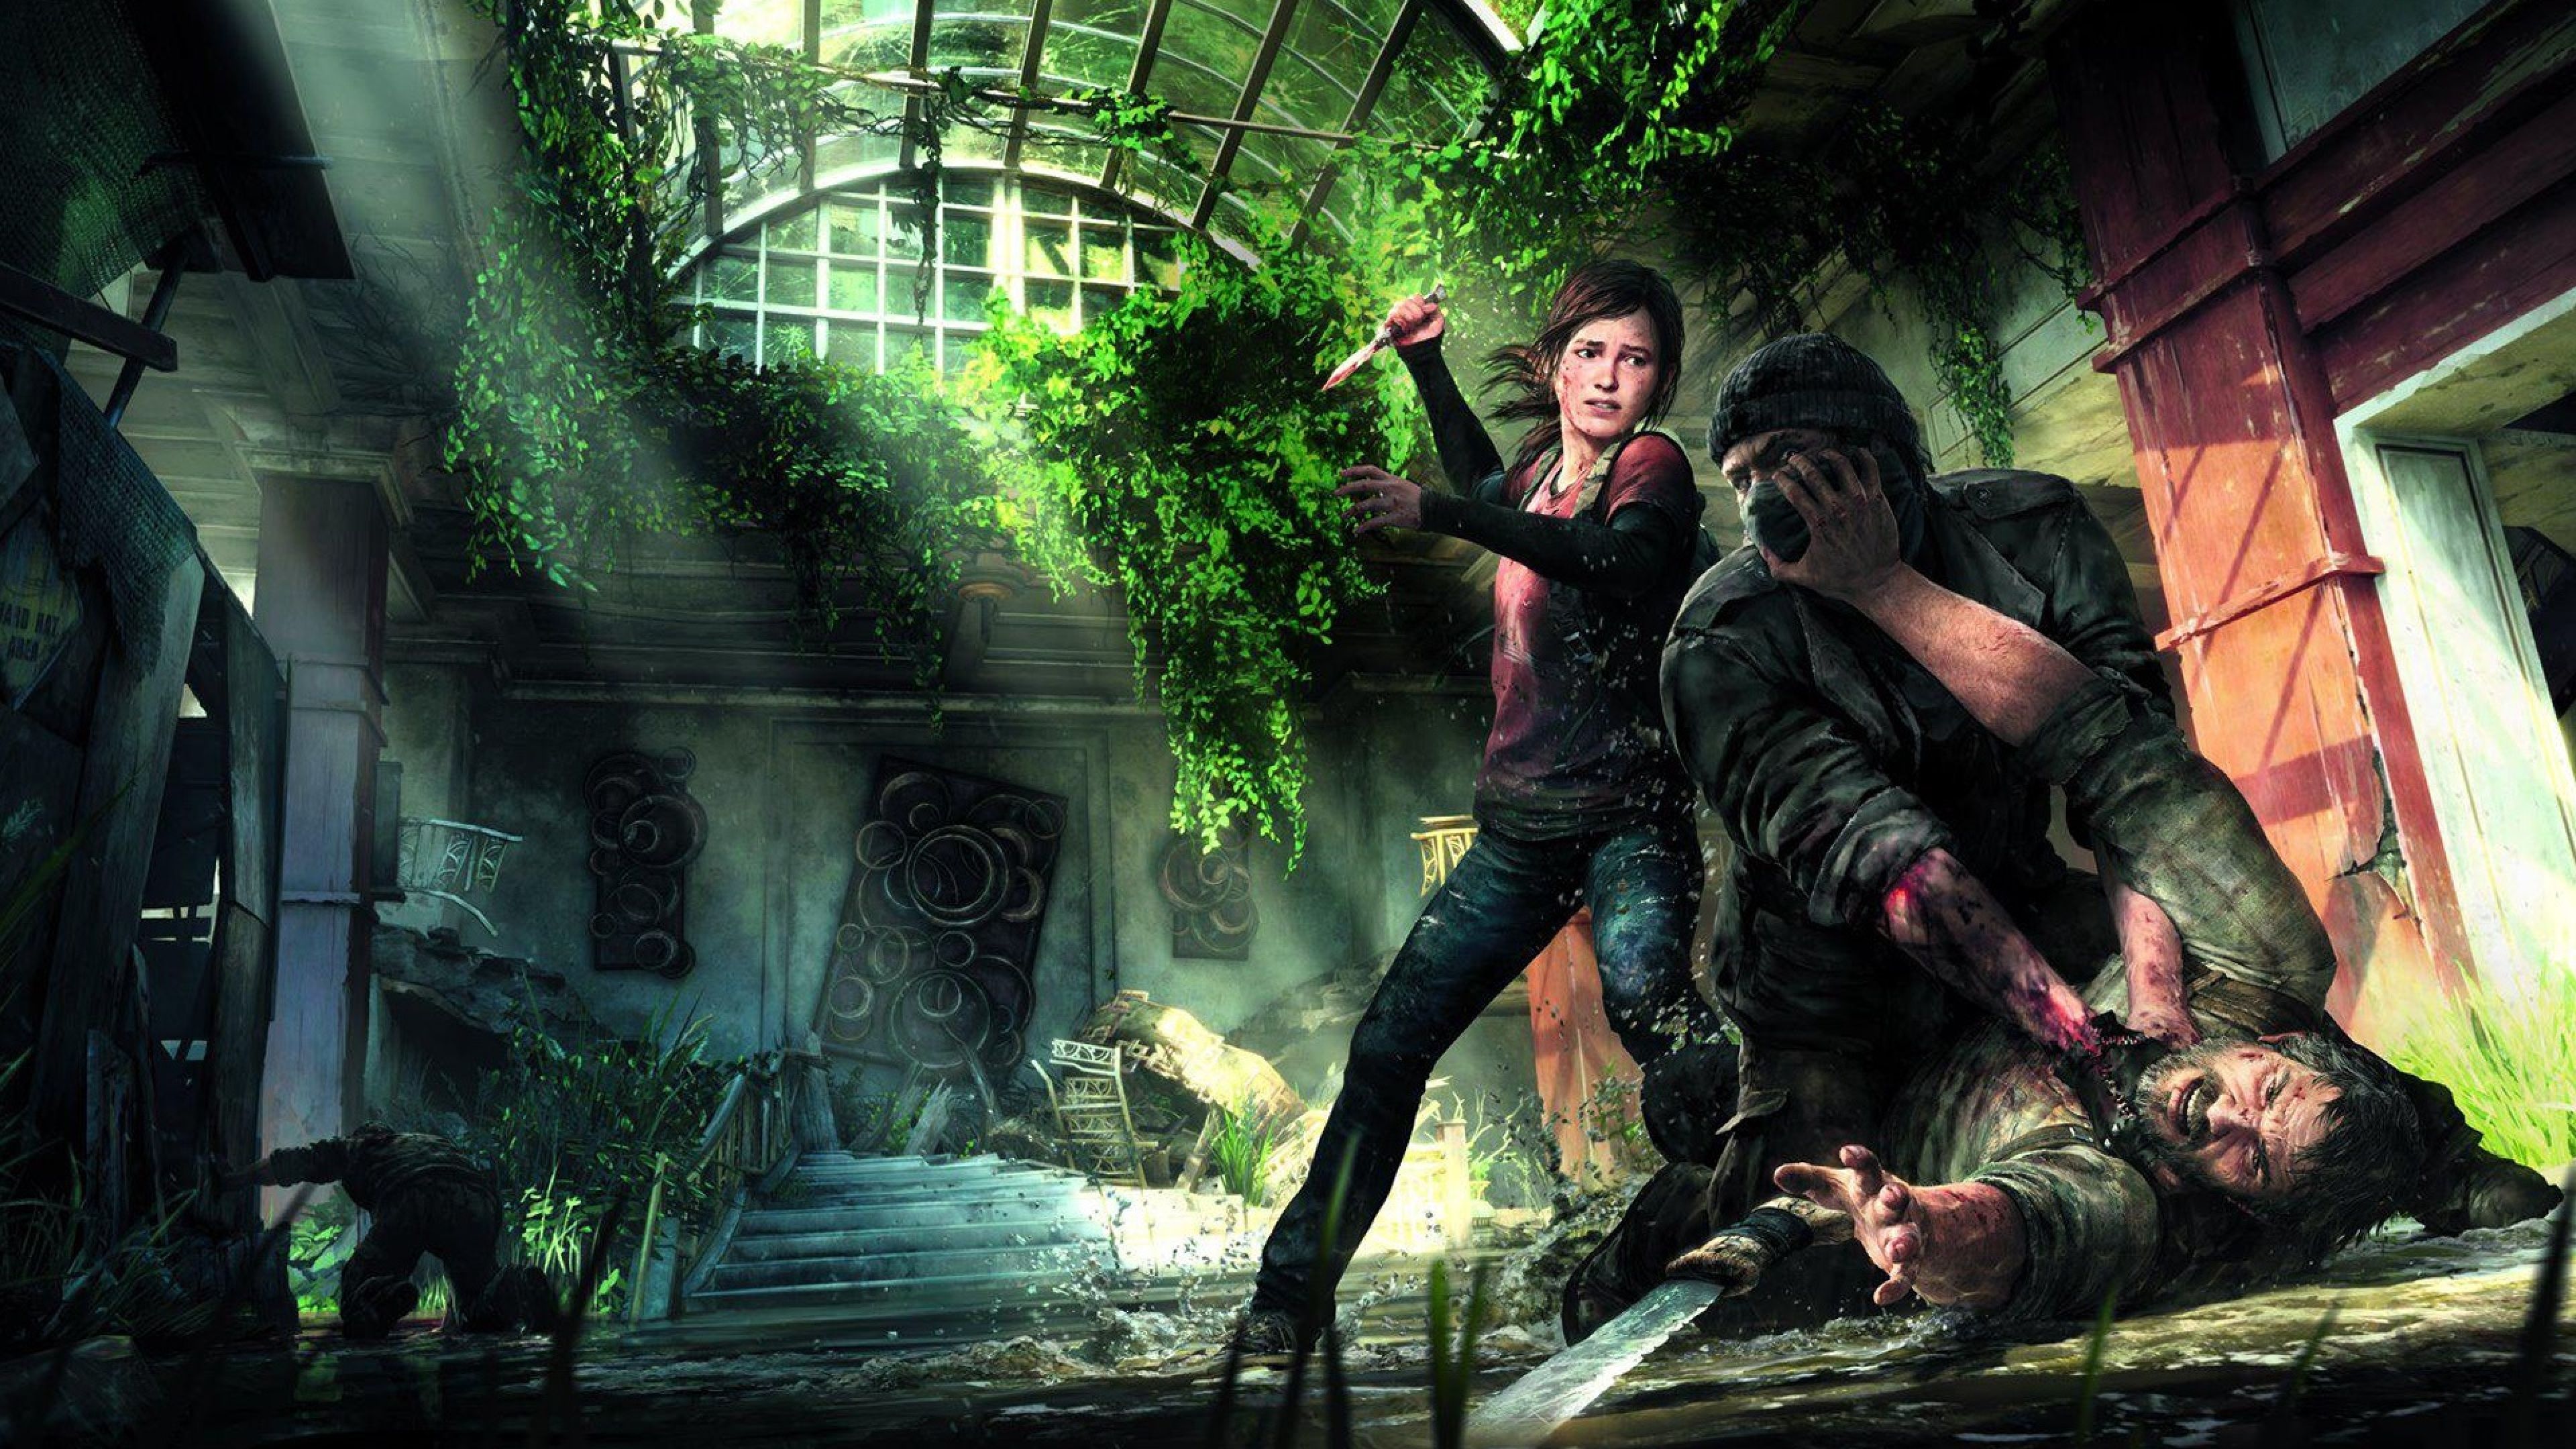 Download Man With Axe In The Last Of Us 4K Wallpaper